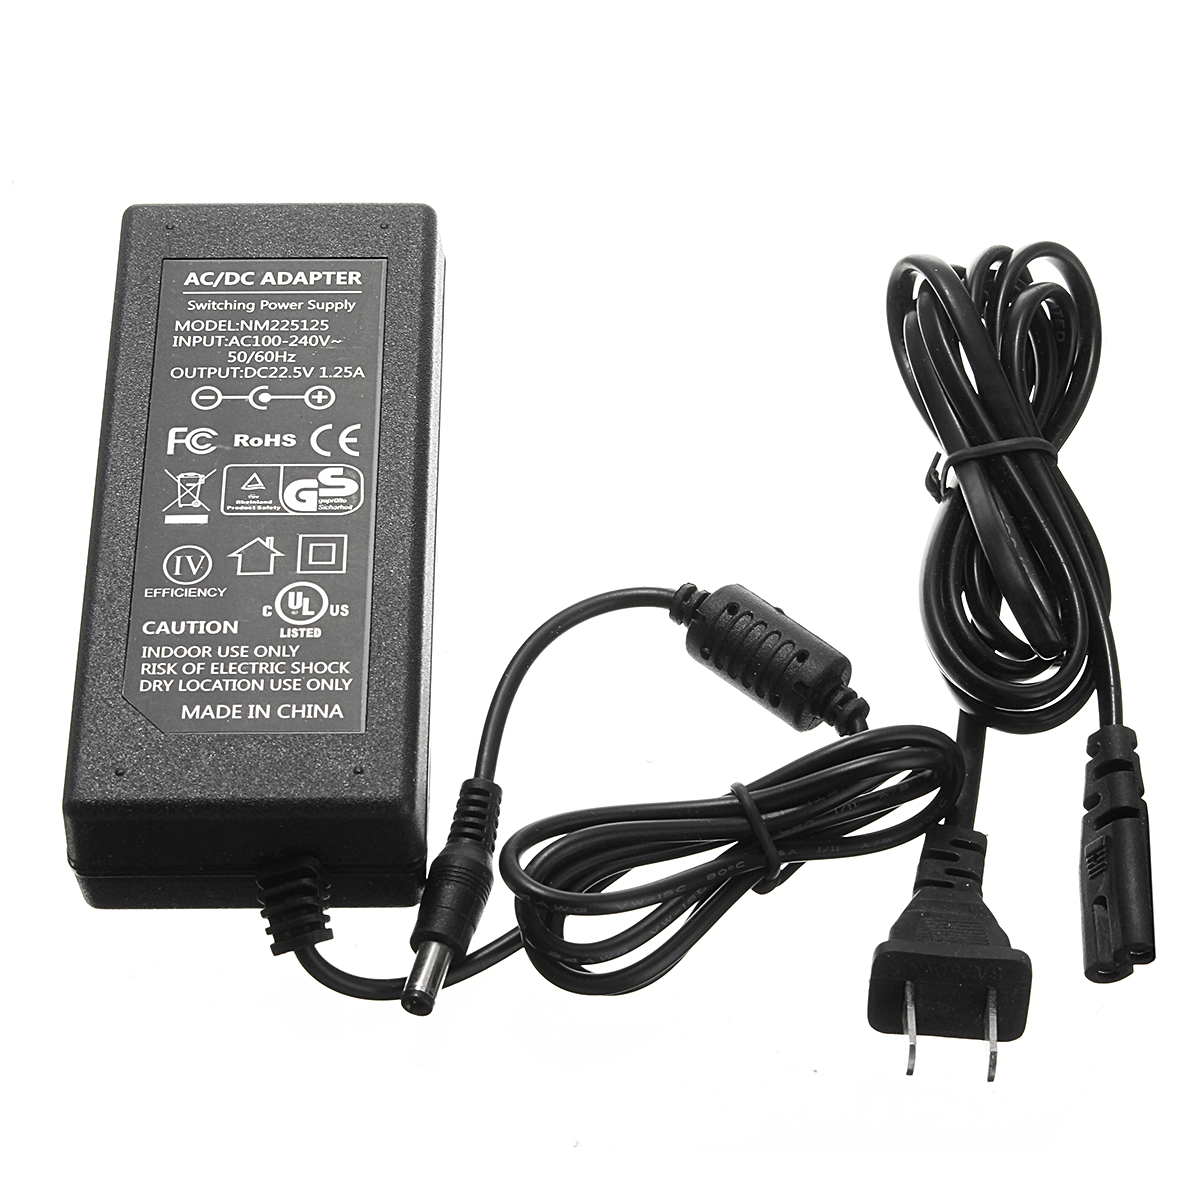 30W-225V-125A-Power-Supply-ACDC-Charger-Adapter-Cord-Cable-Charger-For-400-500-600-1363216-3